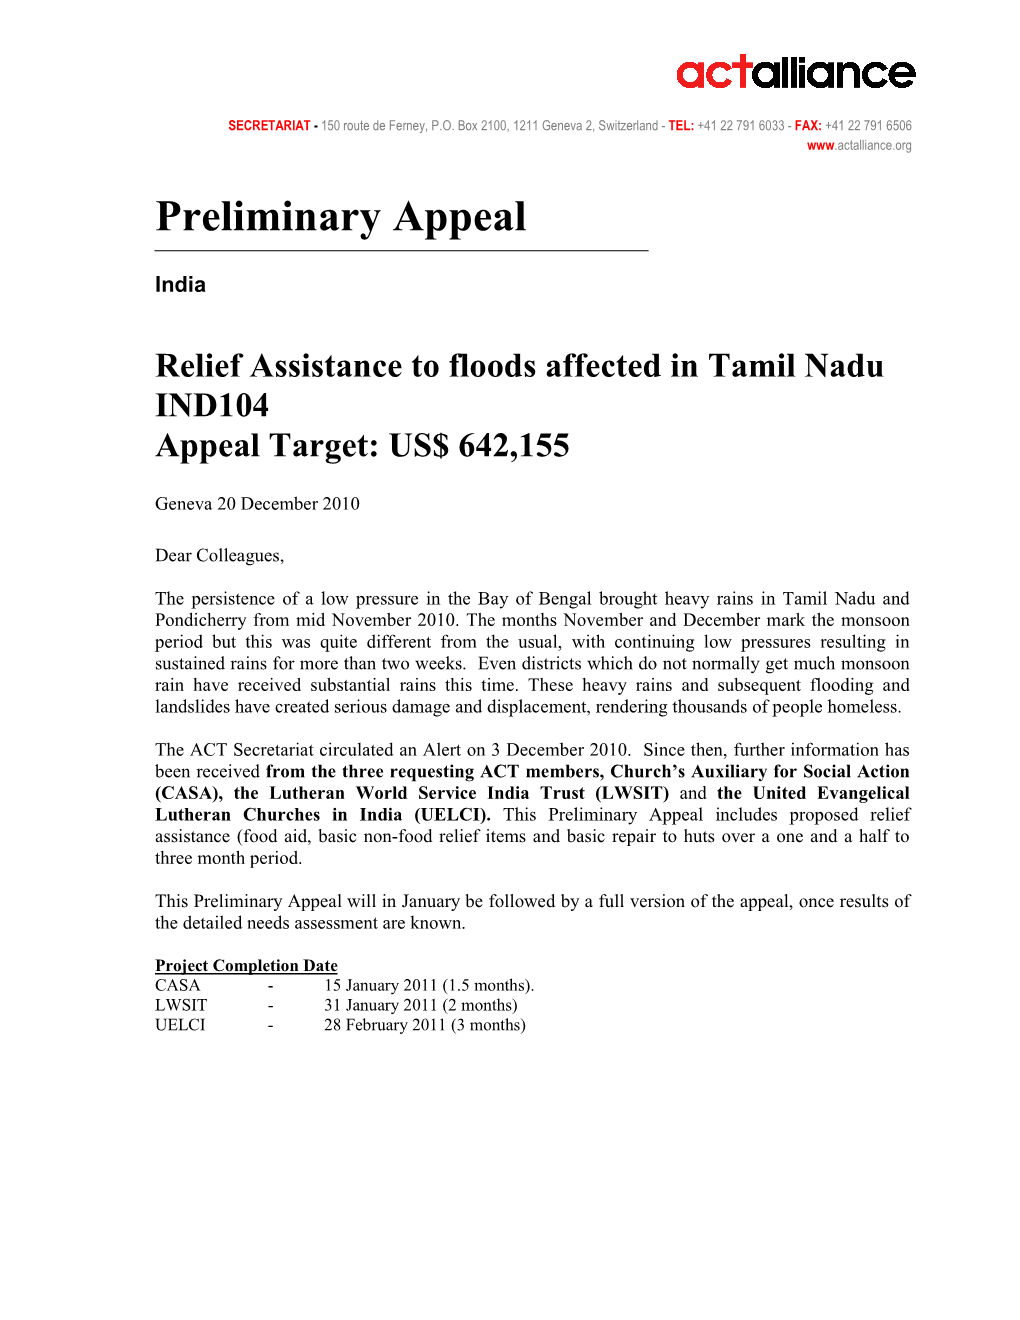 IND104 India Prelimnary Appeal TN Floods for Approval 20 Dec2010